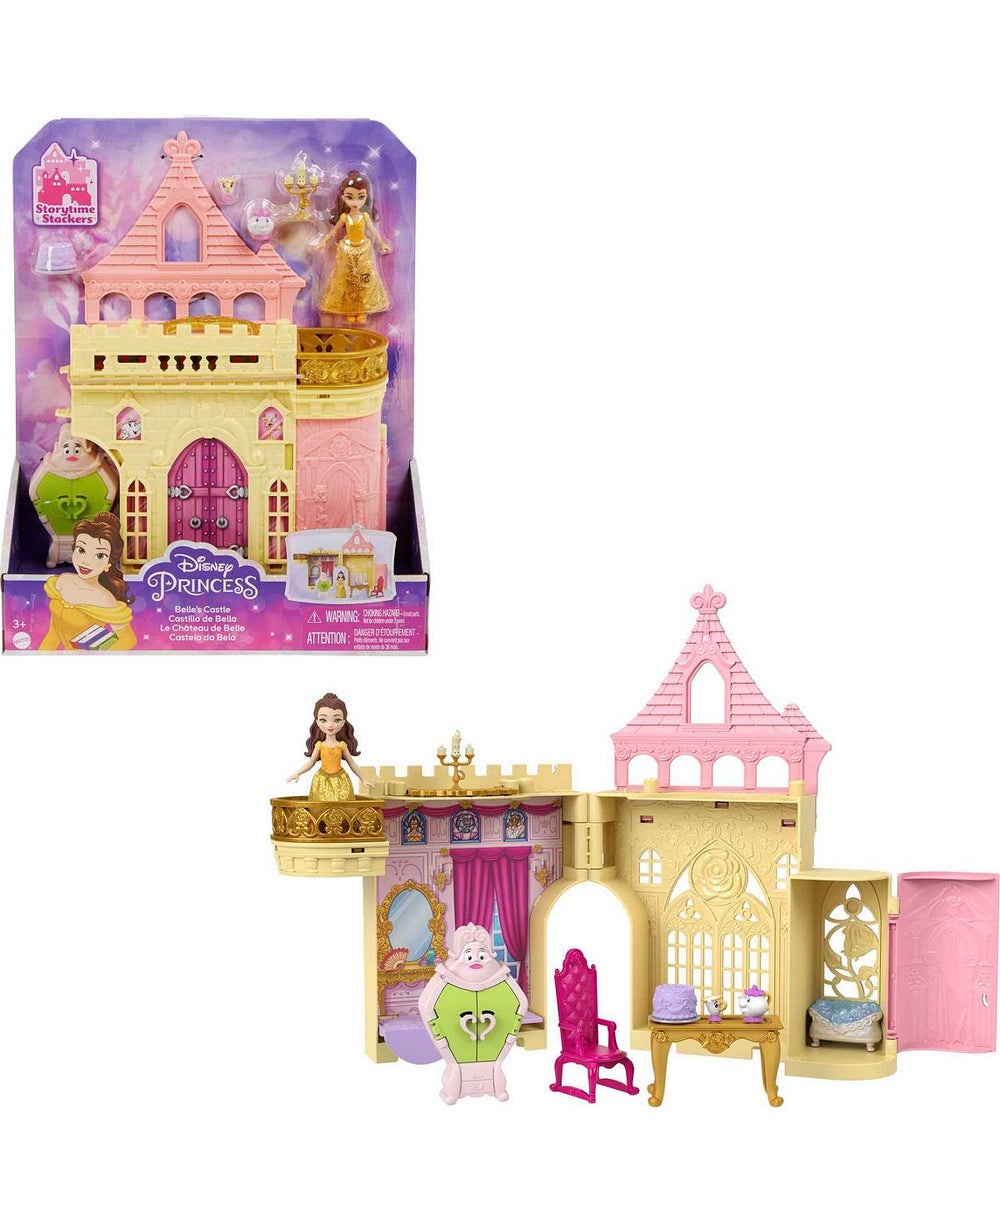 Disney Princess Storytime Stackers Belle's Enchanted Castle Playset